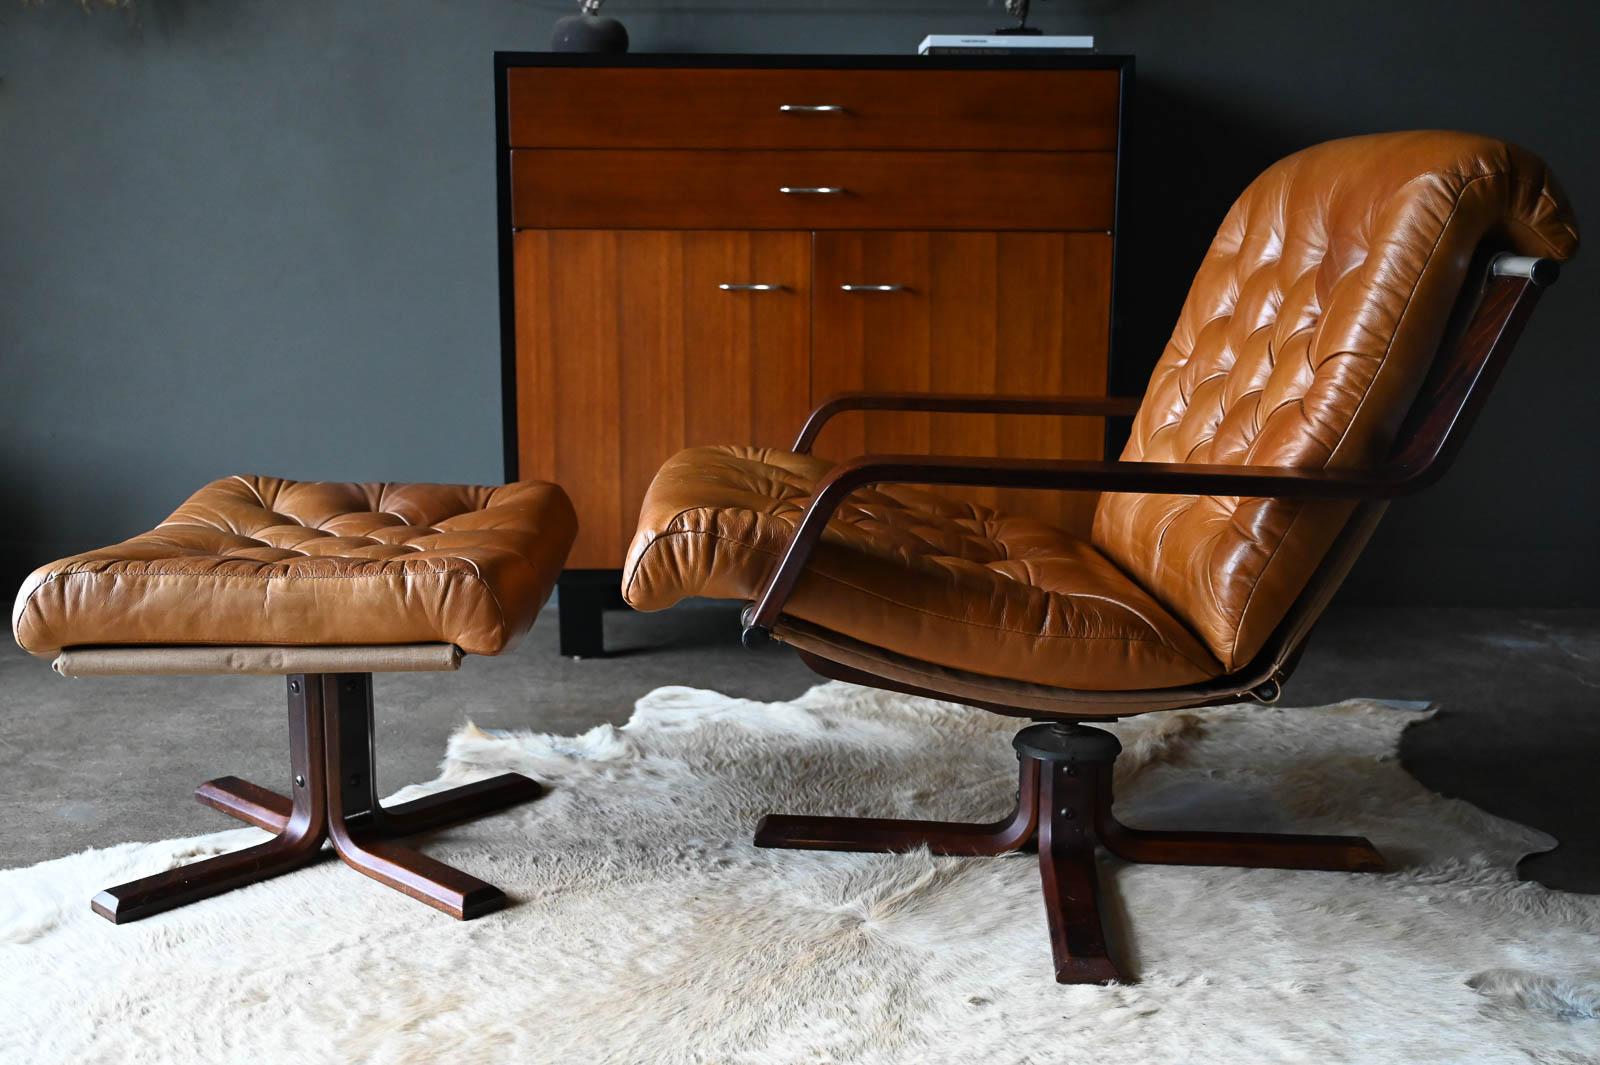 Rare Leather and Rosewood Swivel lounge chair and Ottoman by Sigurd Ressell, 1970. Beautiful untreated saddle leather with great stitching detail in very good original condition with just the perfect amount of patina. Rosewood and chrome frame is